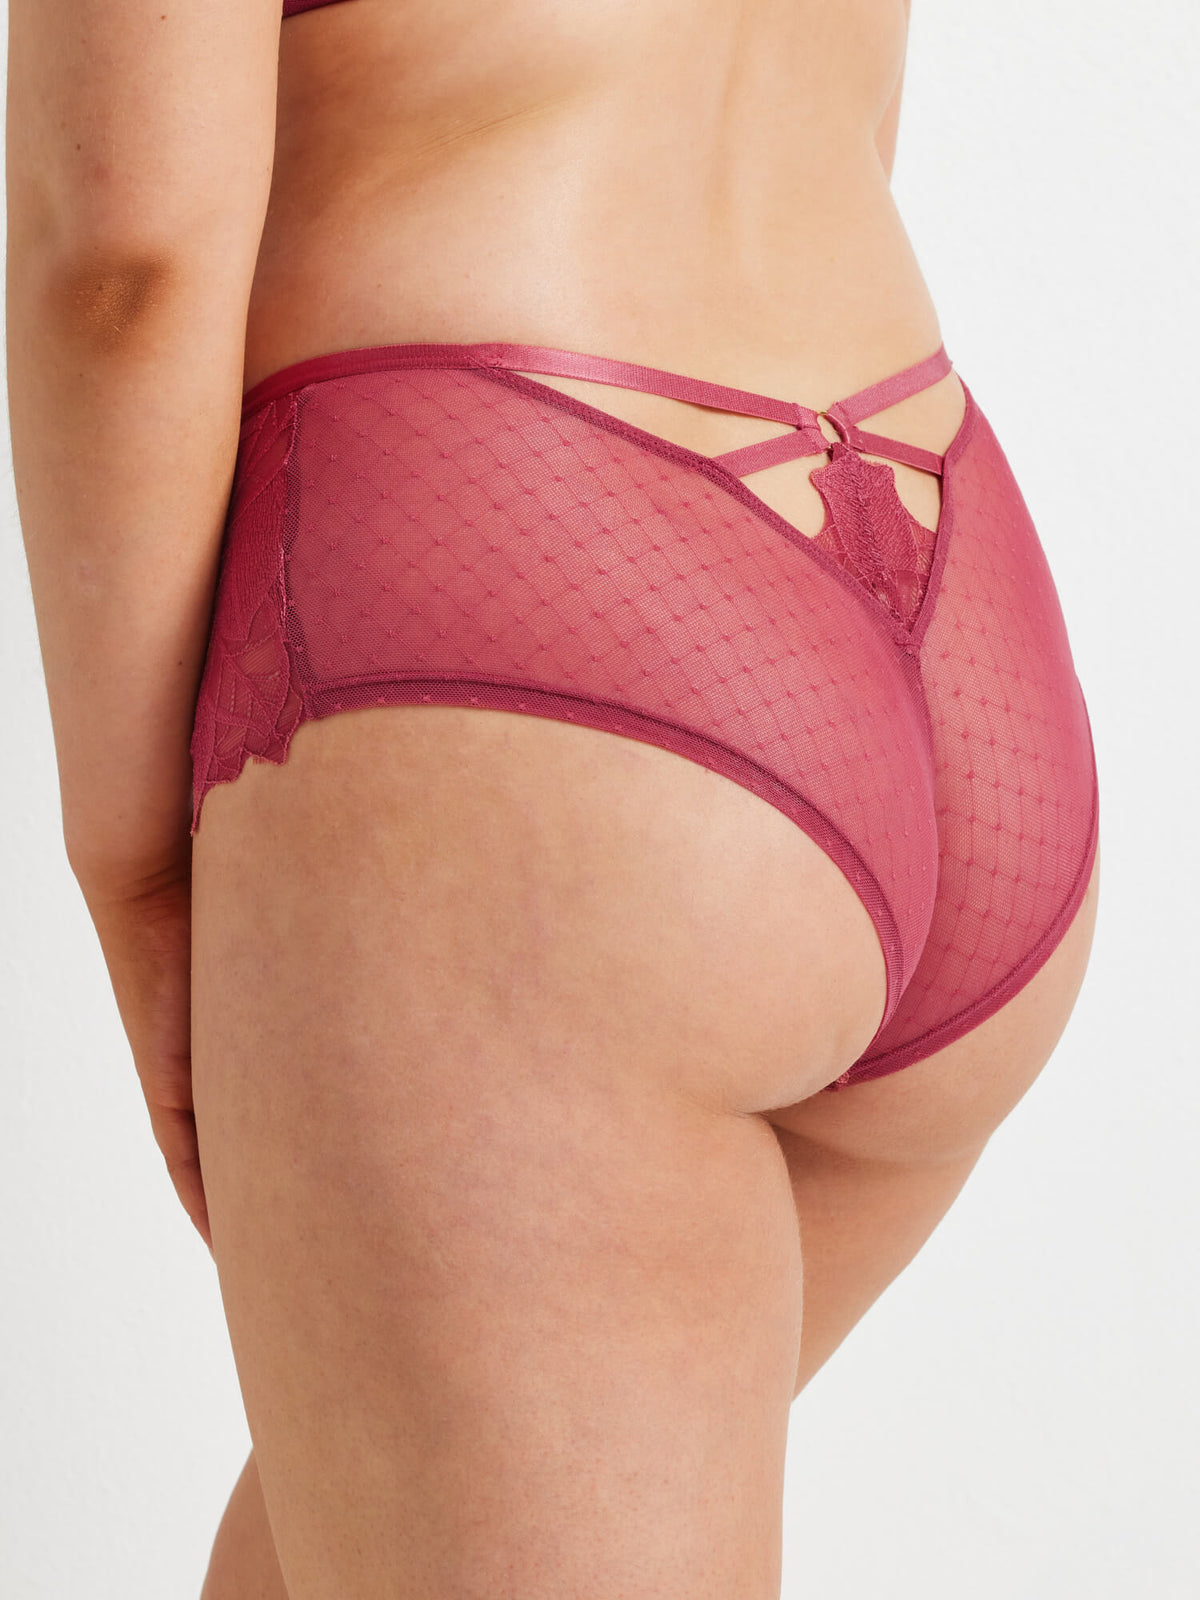 After Dark Frenchy Lace Short in Spice - Kayser Lingerie